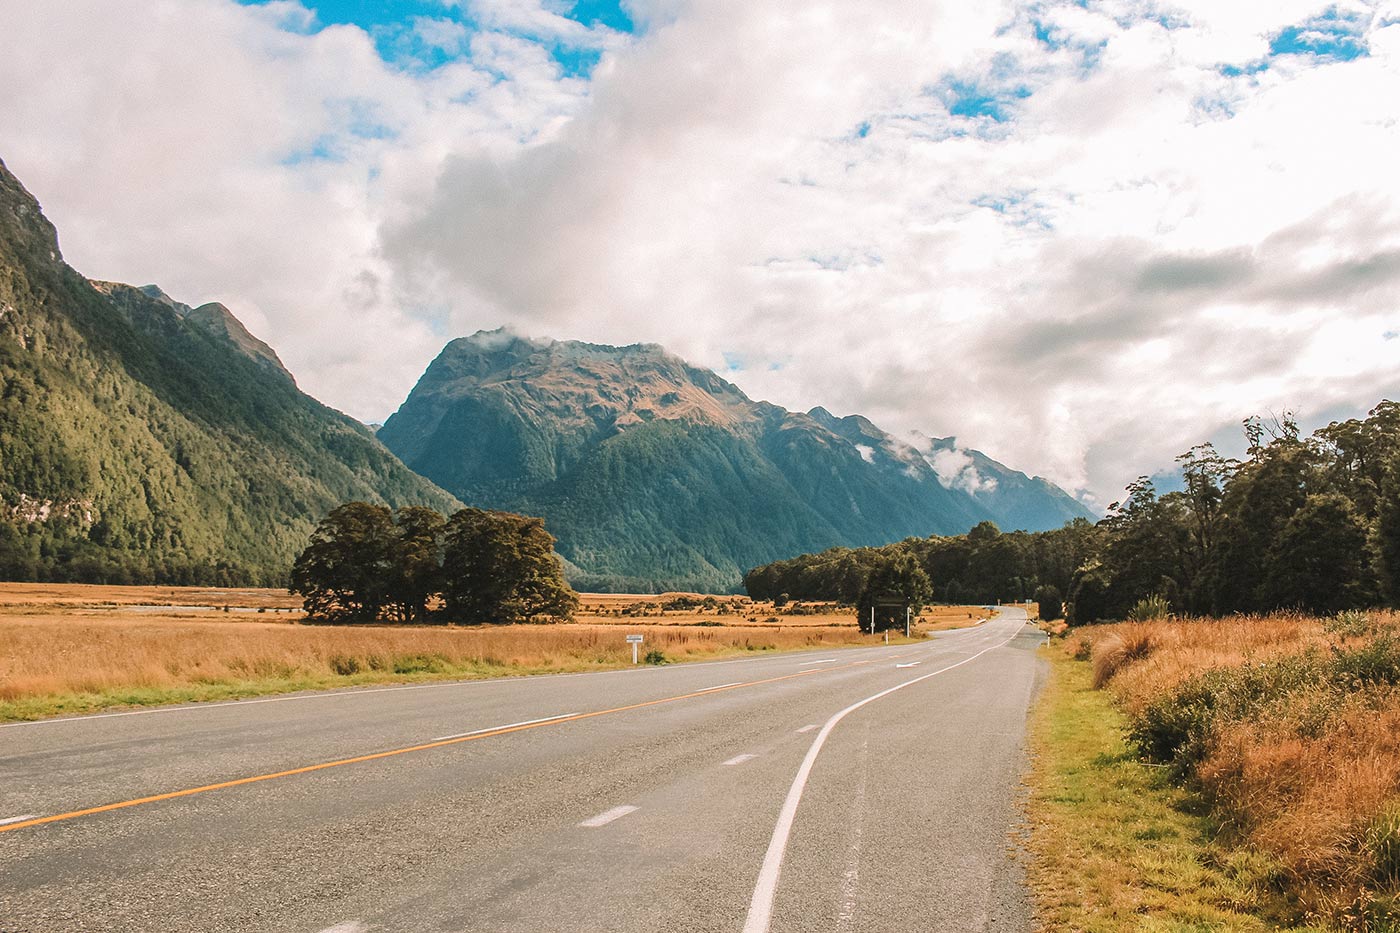 A day trip to Milford Sound, New Zealand blog post